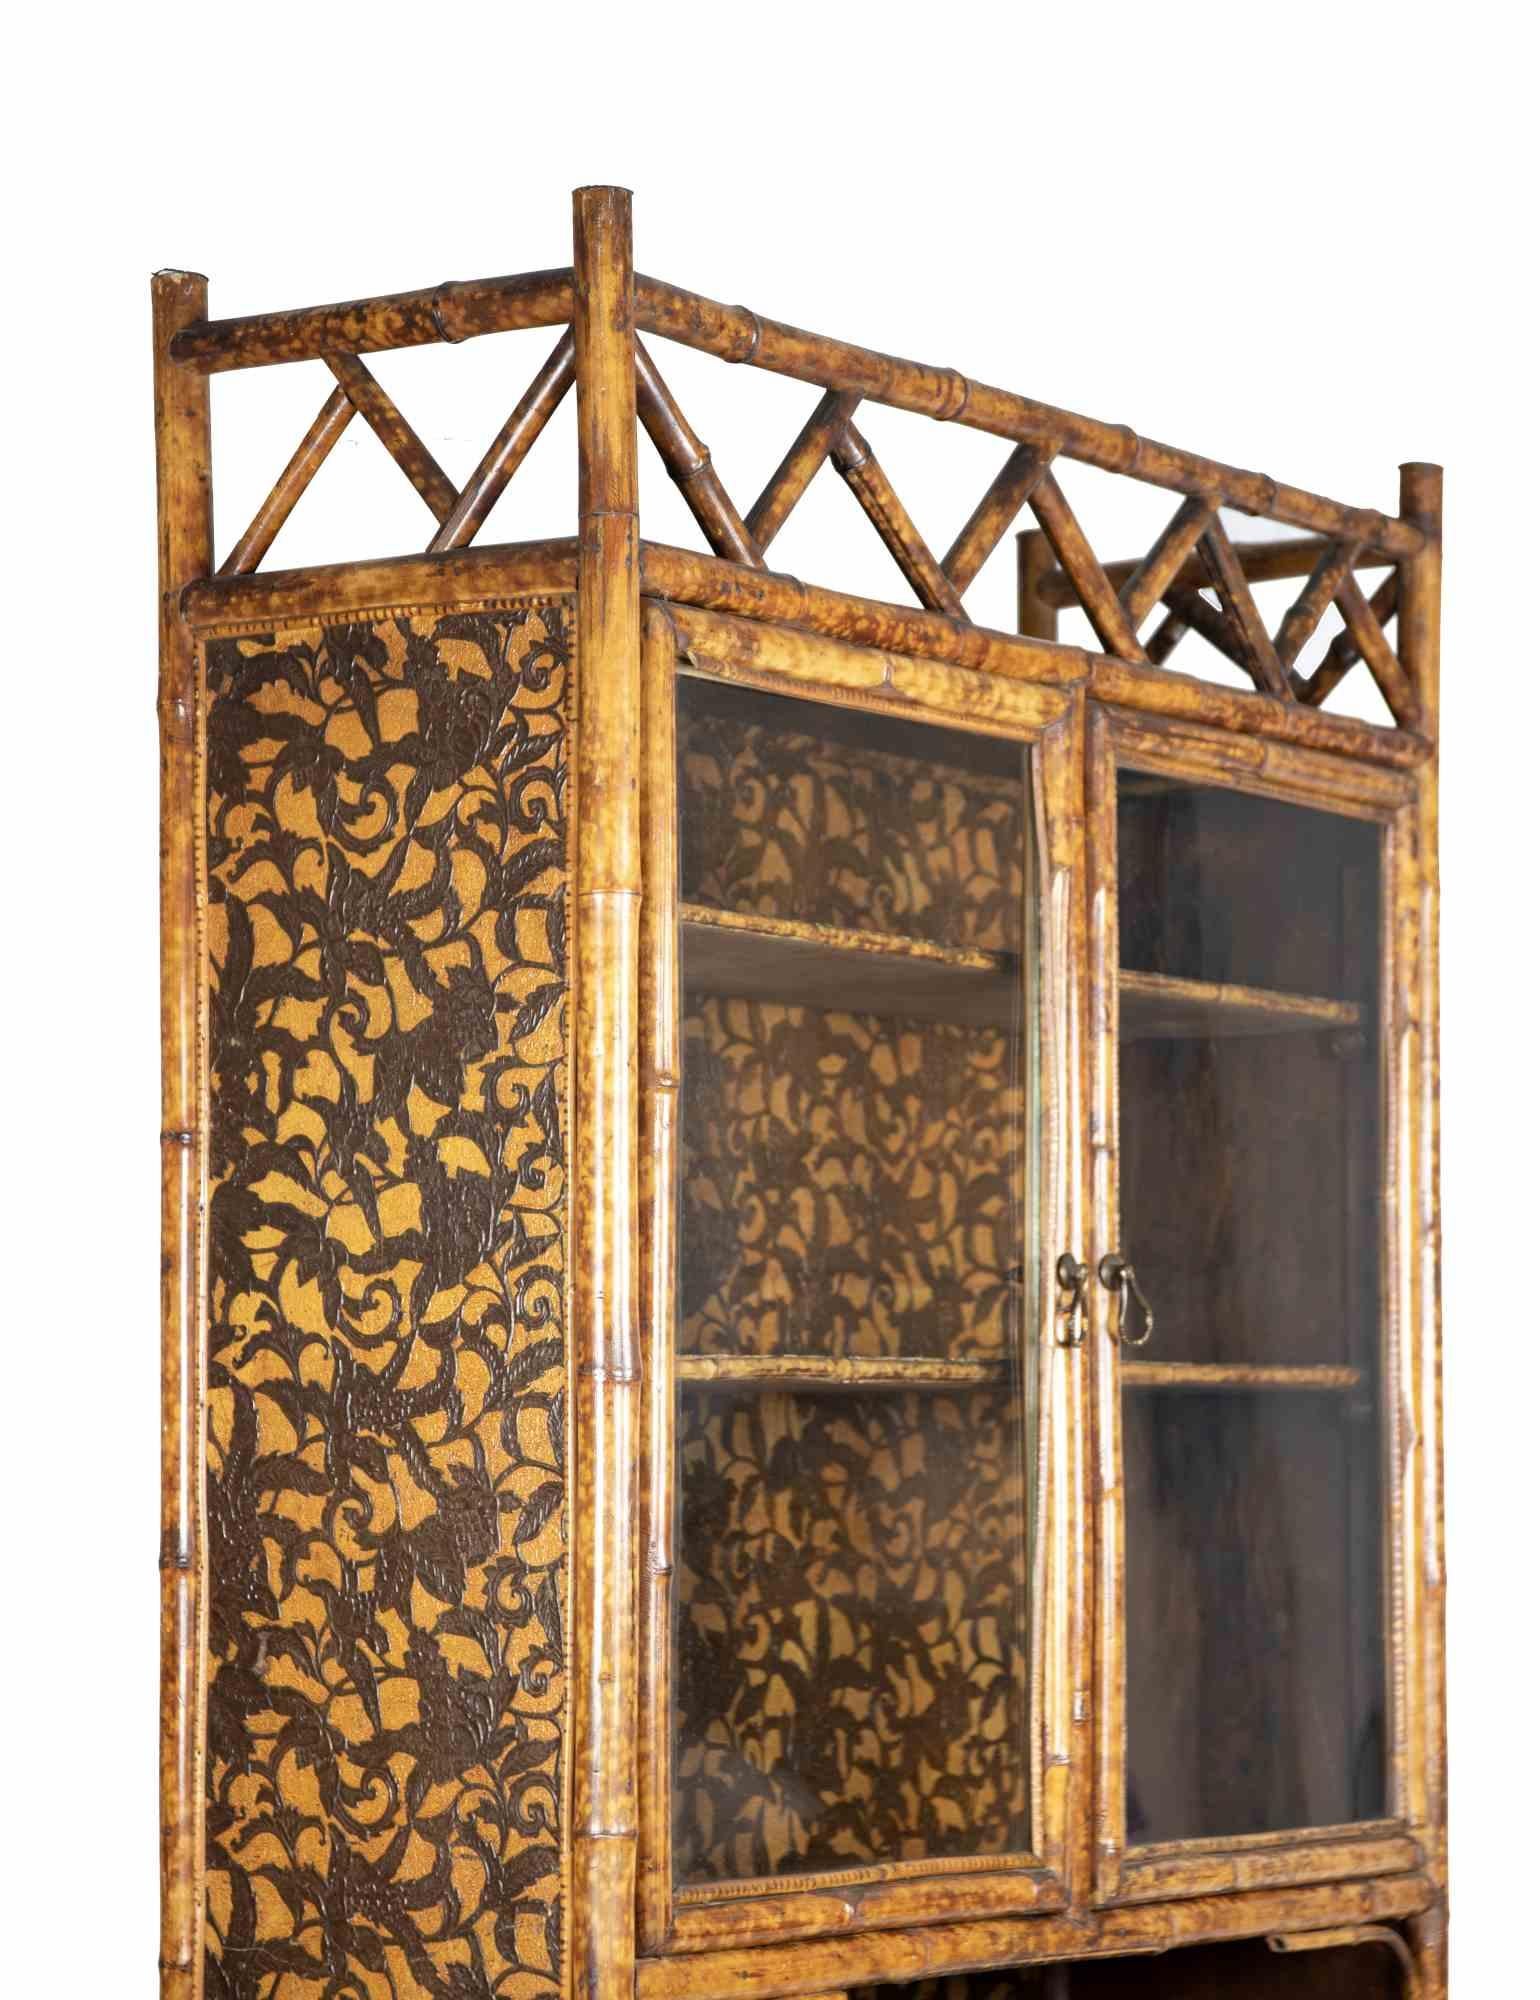 Vintage Display Cabinet is an orginal desgn furniture item realized in the Mid of 20th century.

A very beautiful bamboo cabinet with three shlves in the lower part and an opening door in glass. The cabinet is perfect to preserve your precoius